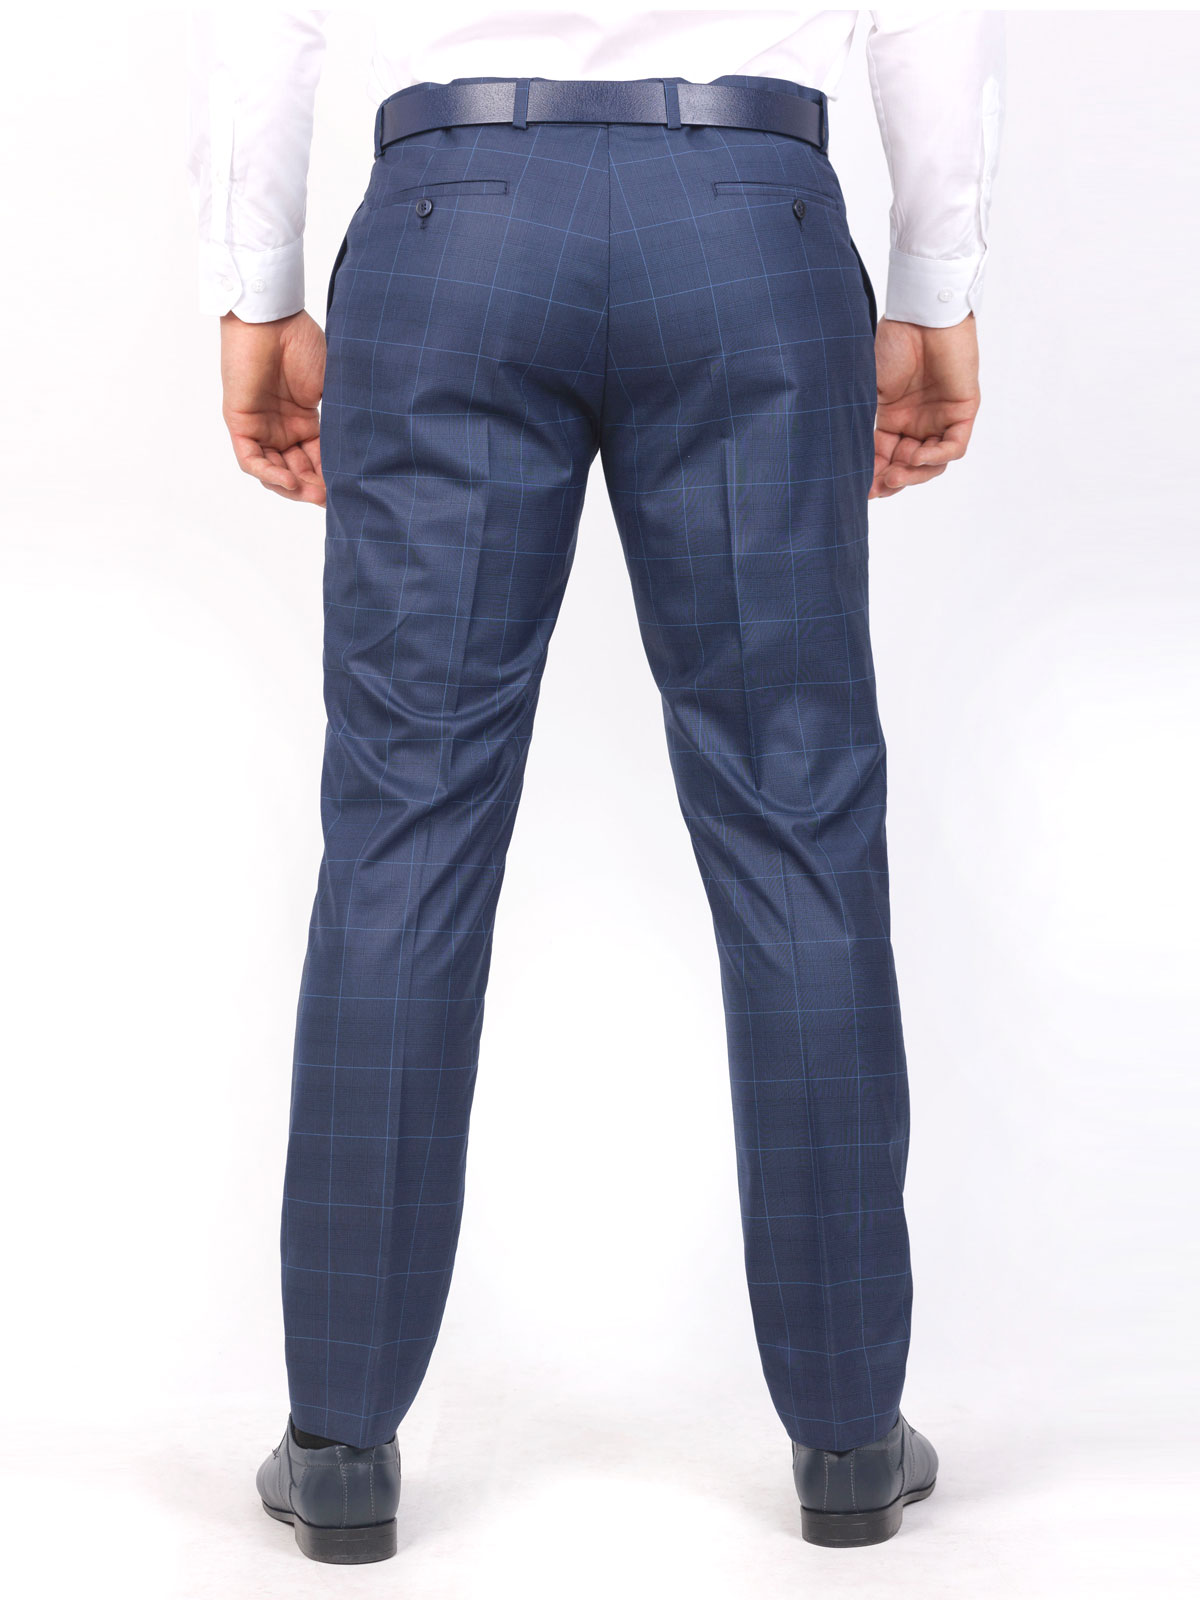 Elegant fitted trousers - 63335 € 71.99 img2